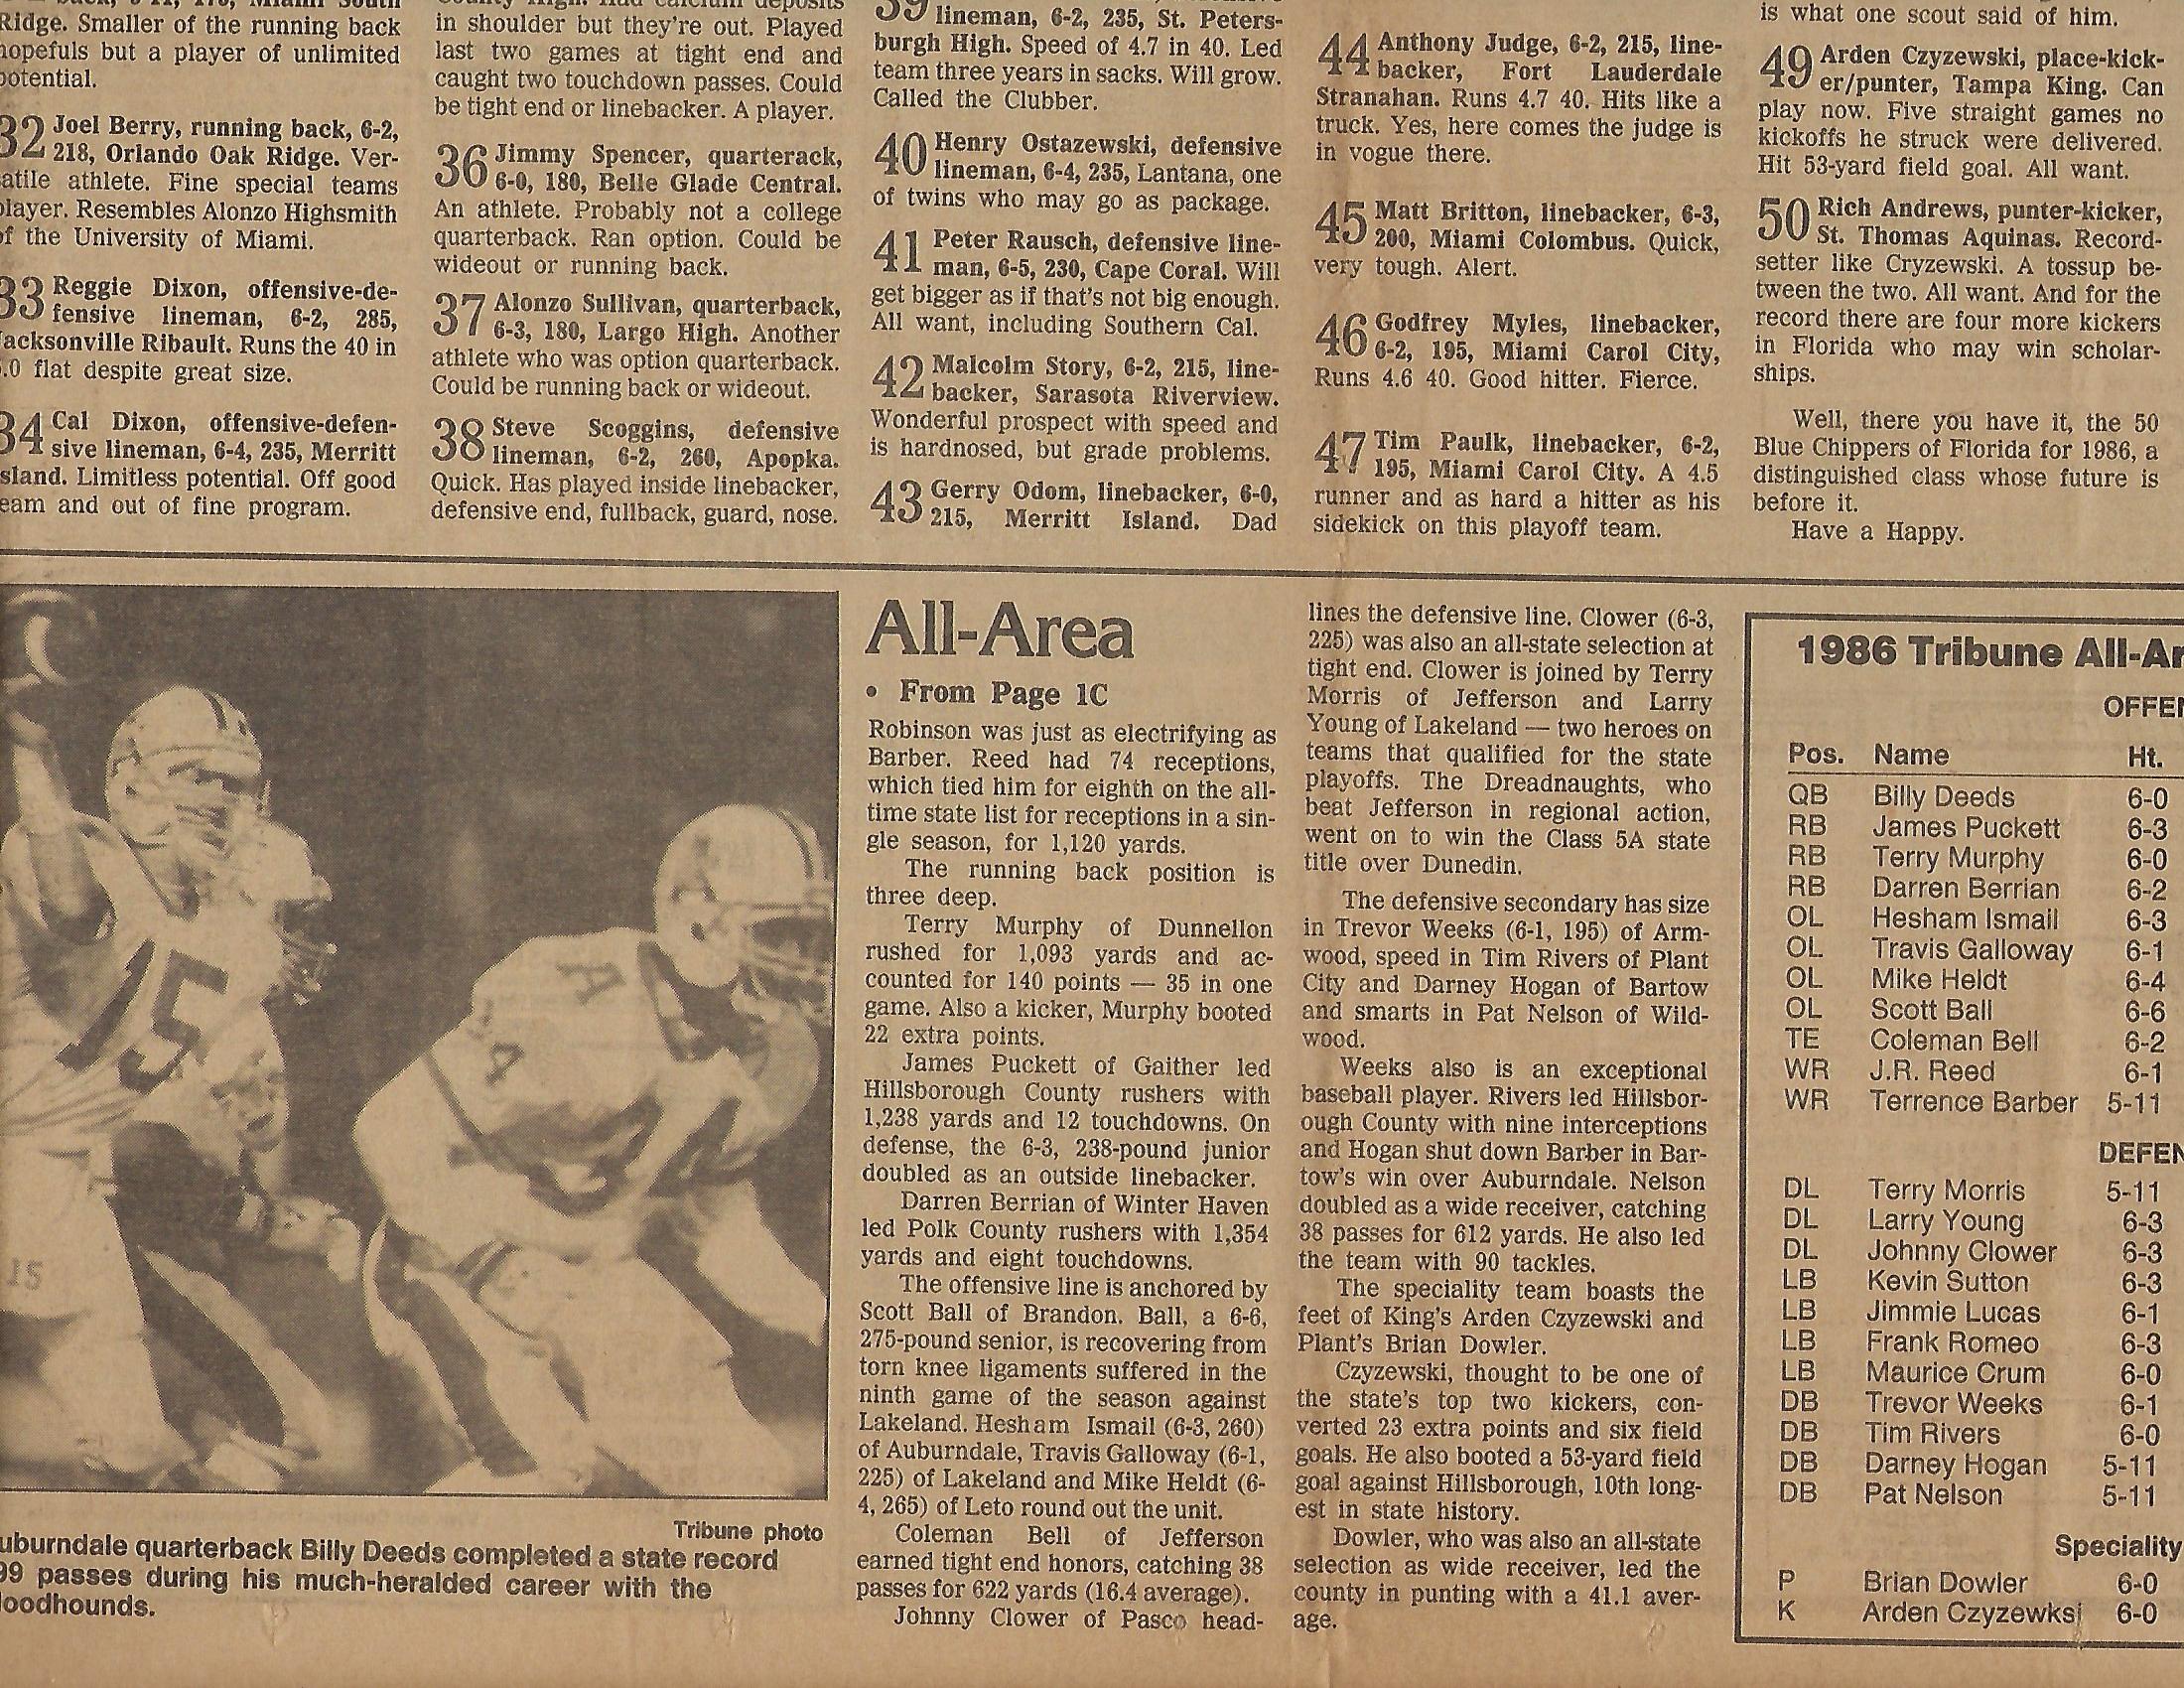 December 25th 1986 All Area Team Page 2.jpg